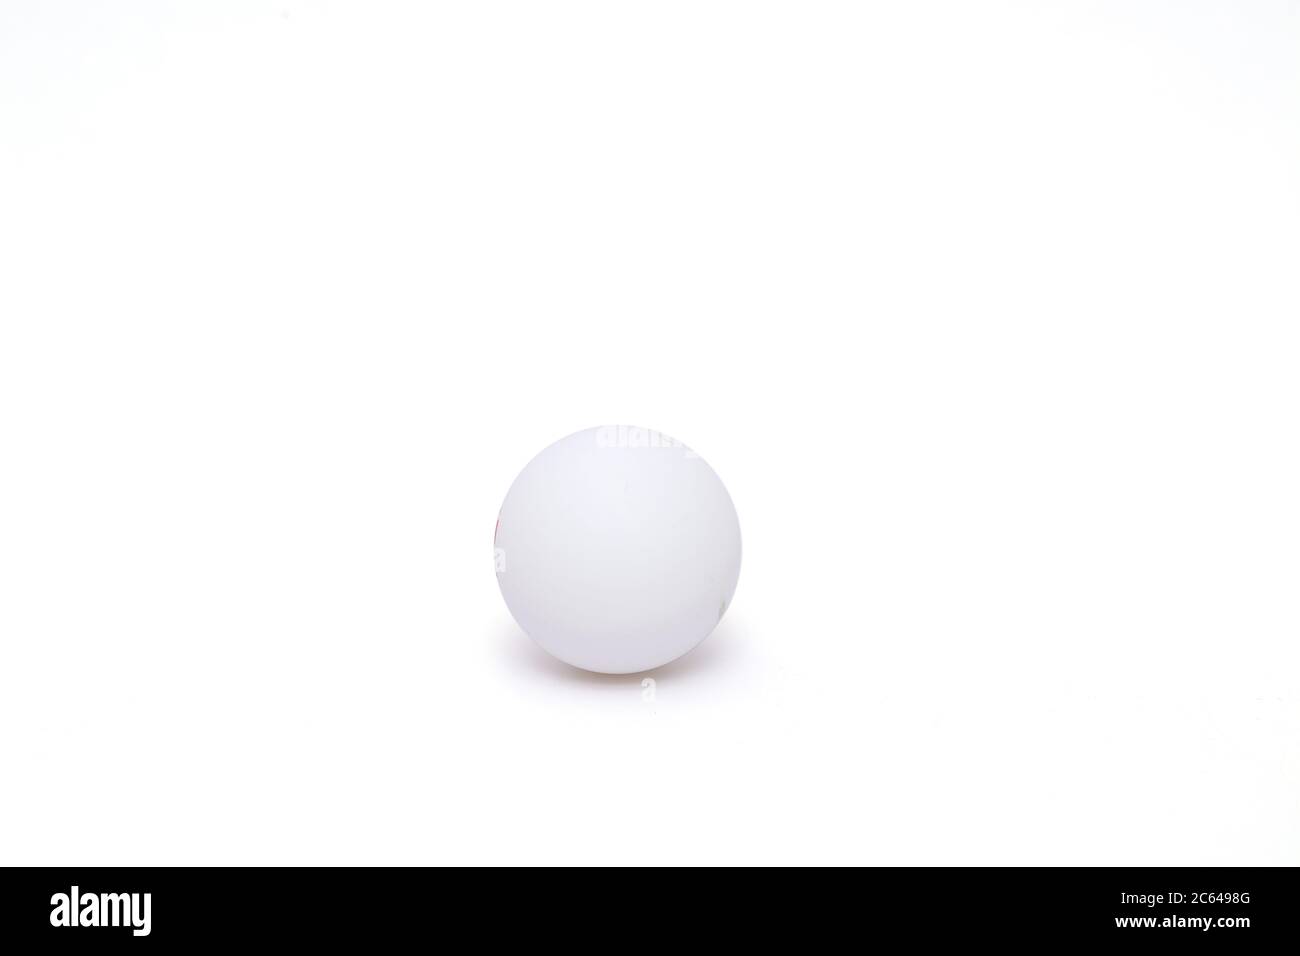 Portrait of White and Yellow Balls. Isolated on white background. Stock Photo